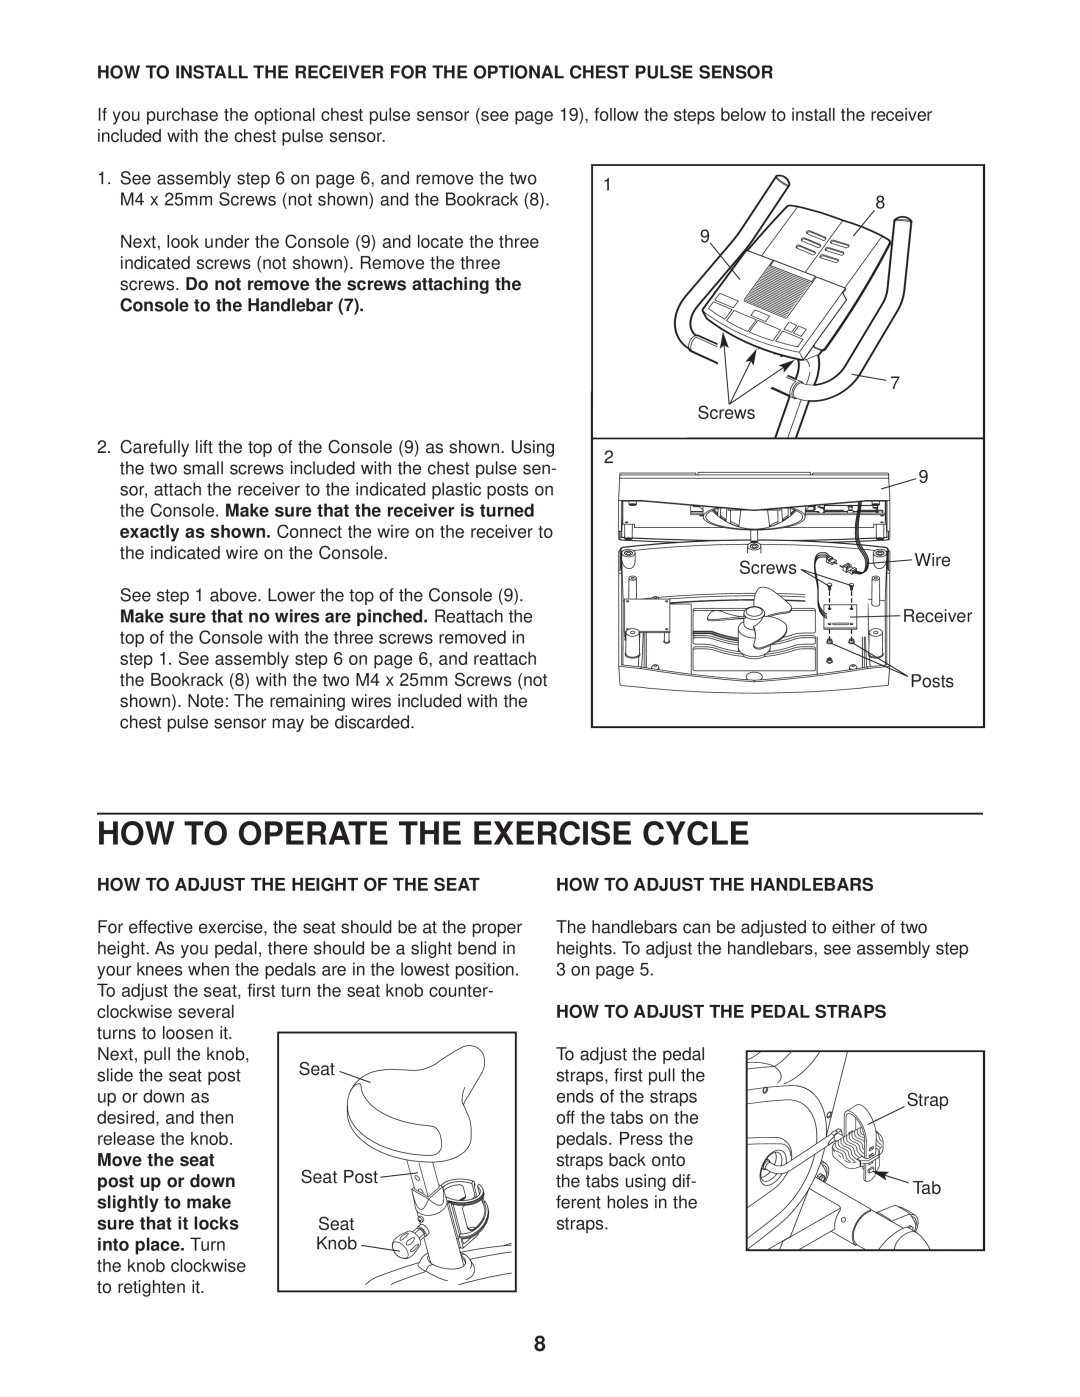 ProForm PFEX4986.0 How To Operate The Exercise Cycle, How To Install The Receiver For The Optional Chest Pulse Sensor 